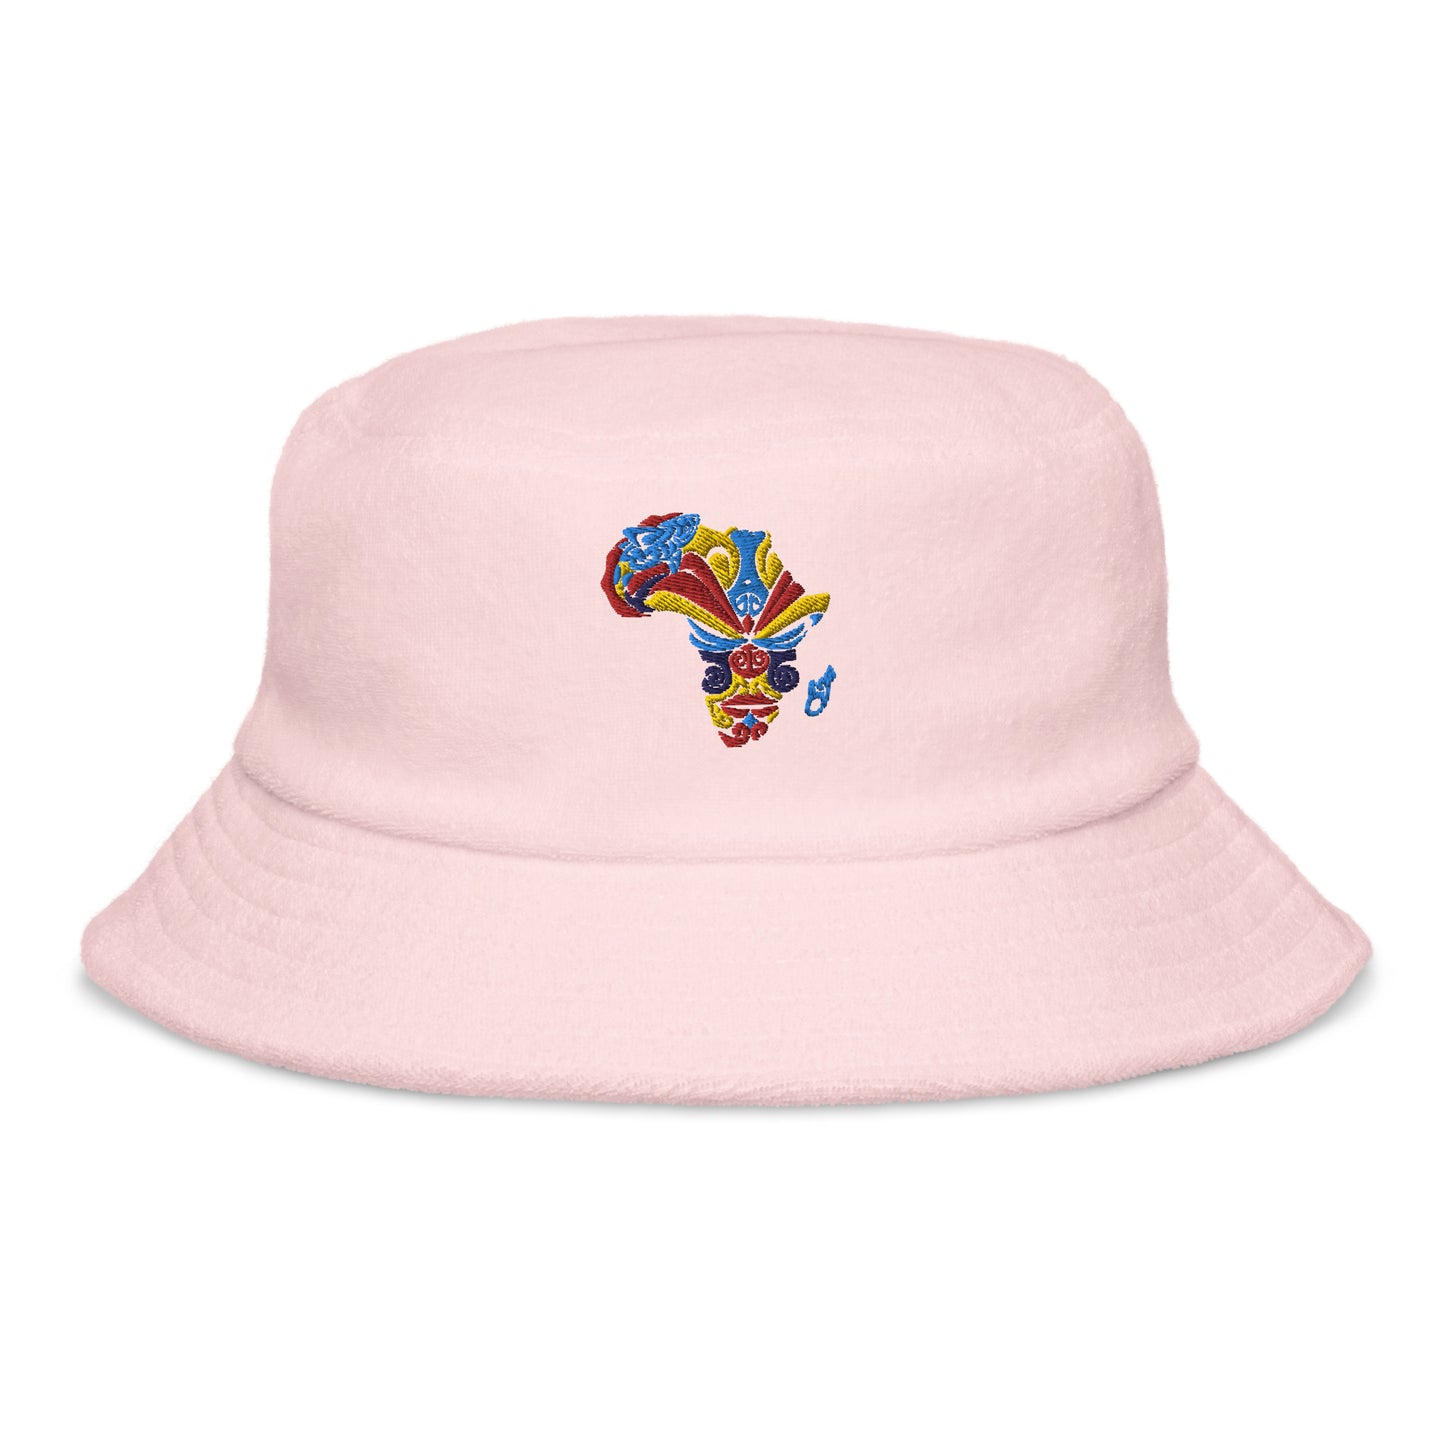 Terry Cloth Bucket Hat - Banamerica Collection